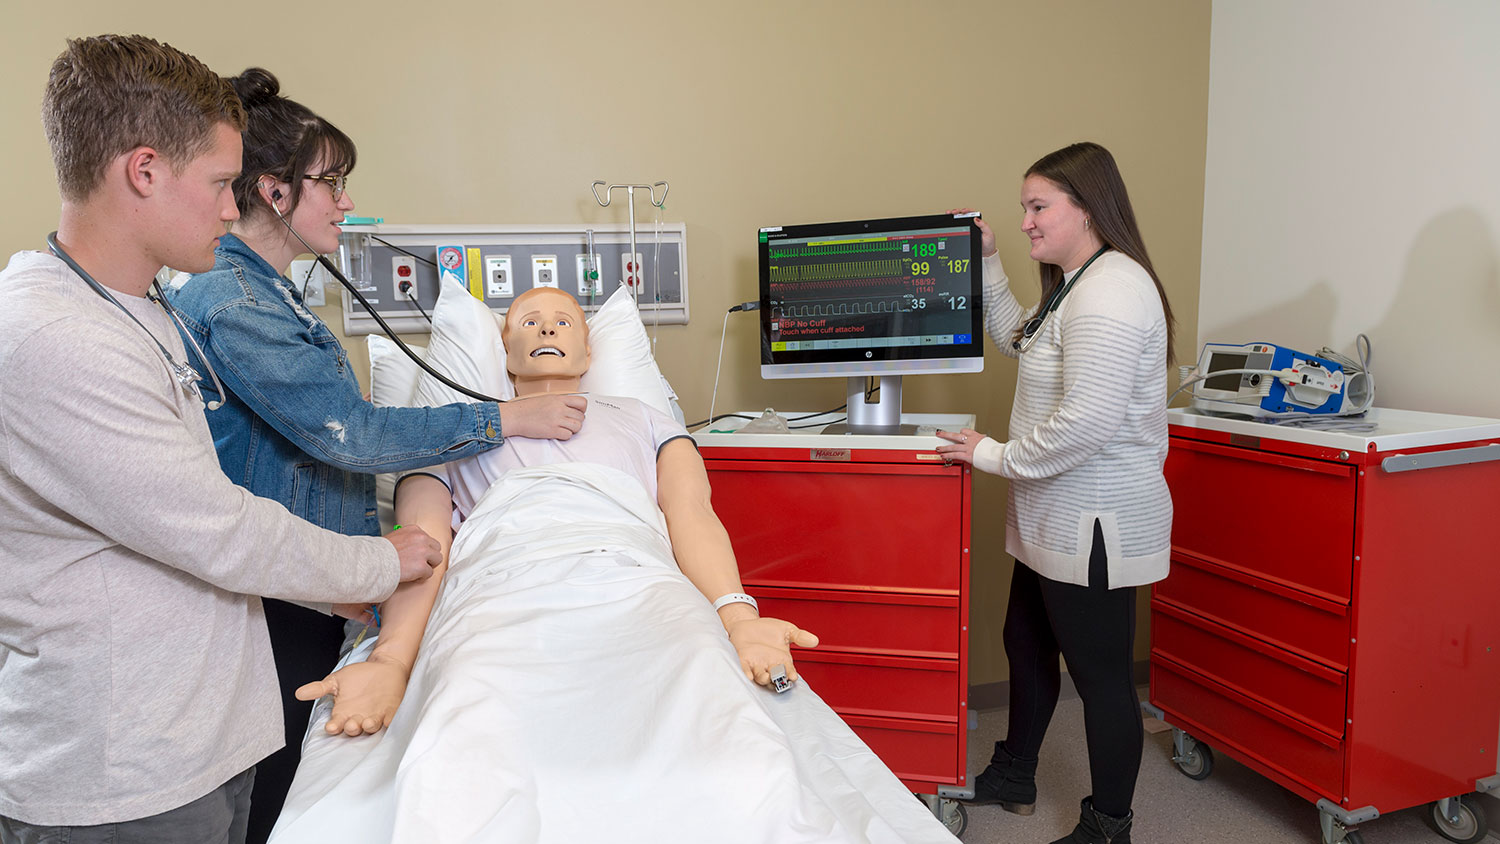 3 students using a stethoscope on a dummy patient and a monitor with data readouts